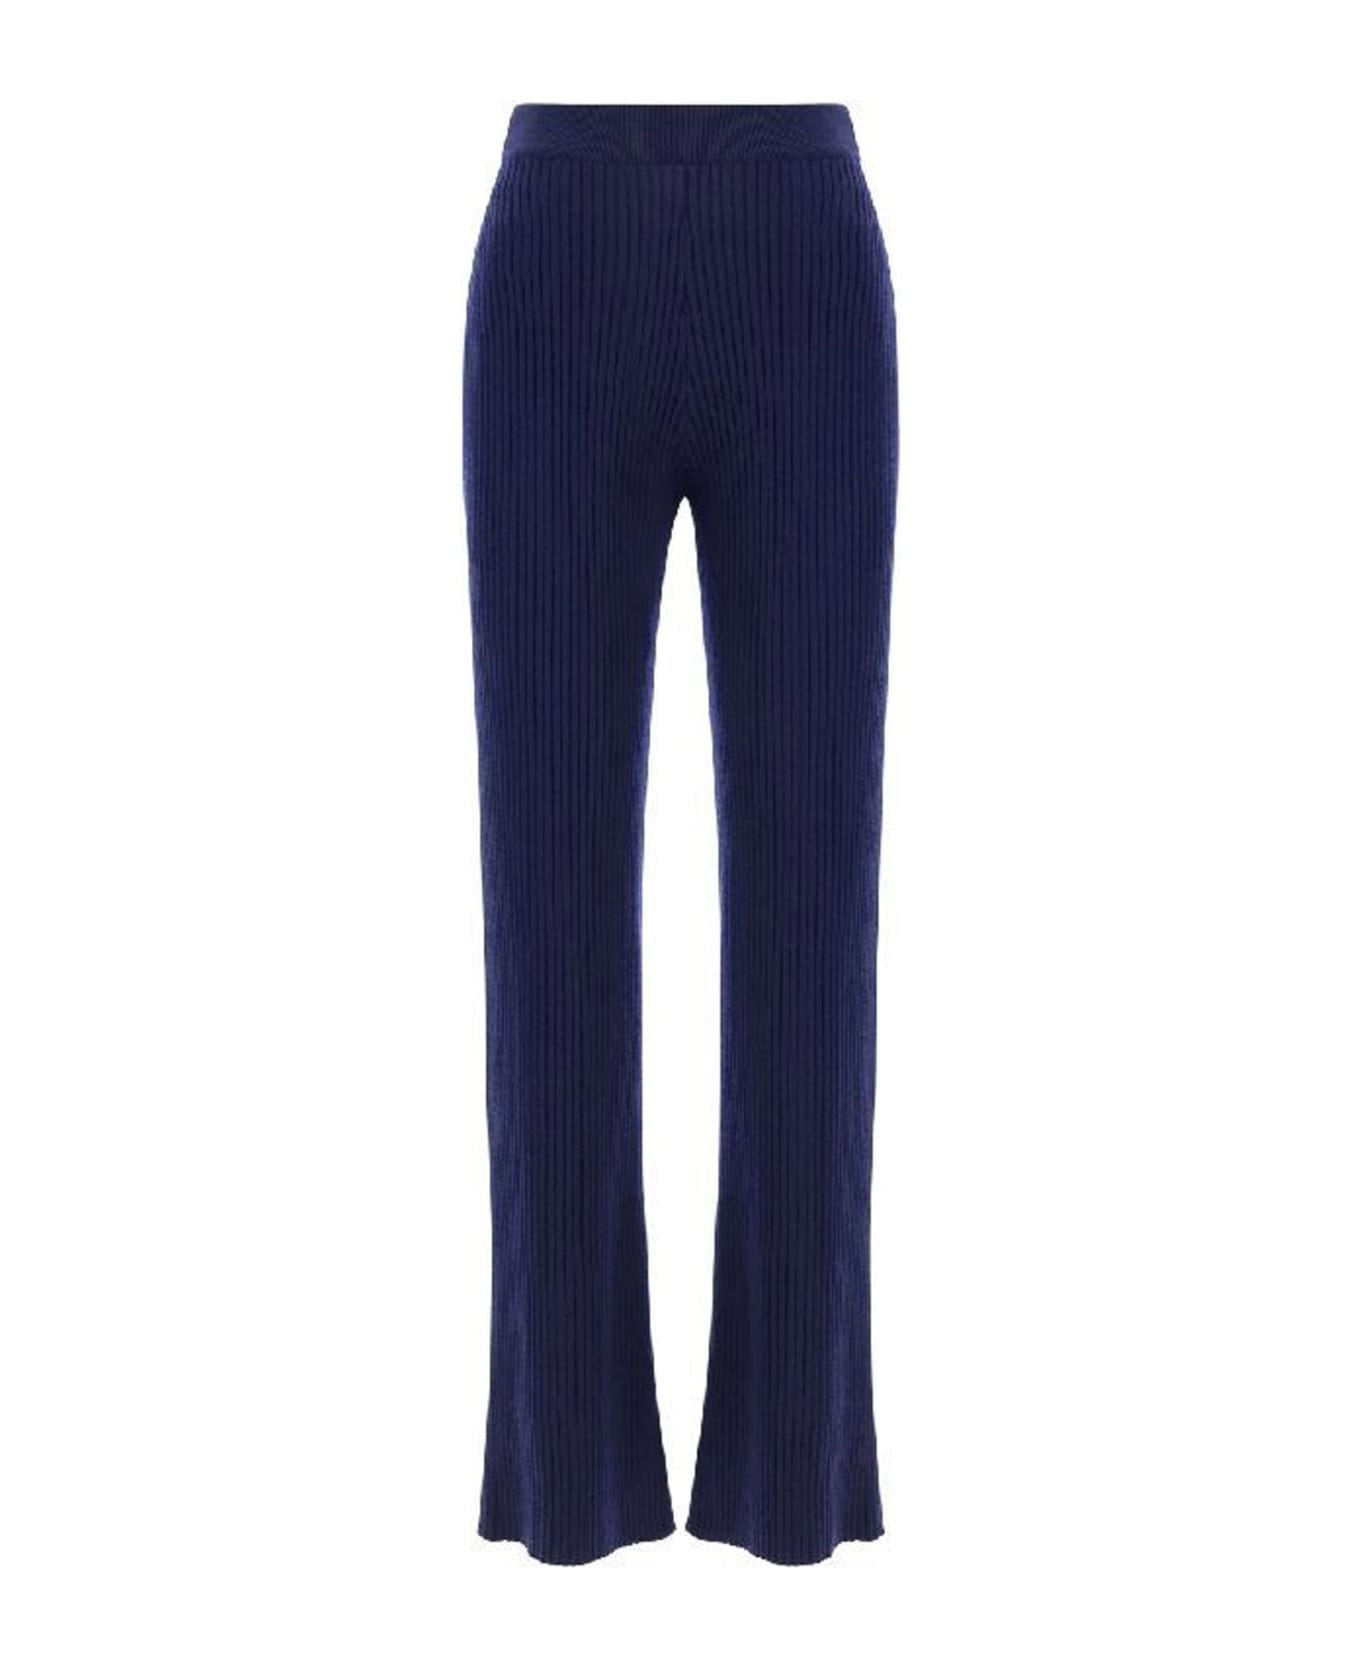 Chloé Wool And Cashmere Pants - Blue